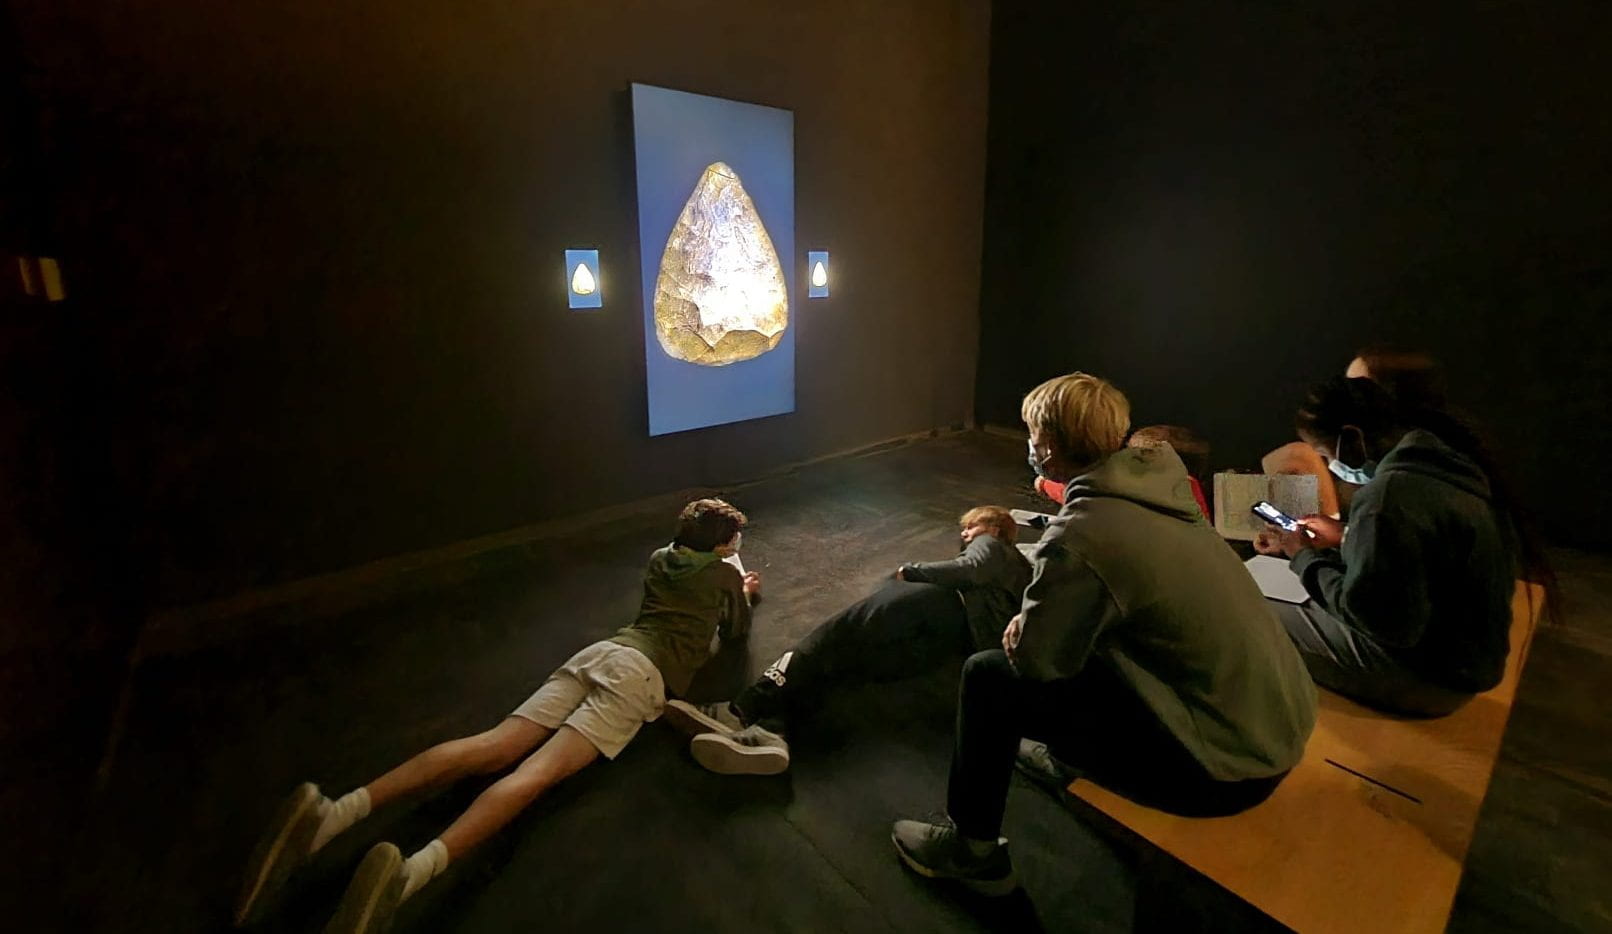 Gallery photo of the exhibition "45 Paleolithic Handaxes from Transfigurations: Reanimating the Past | David Lebrun"